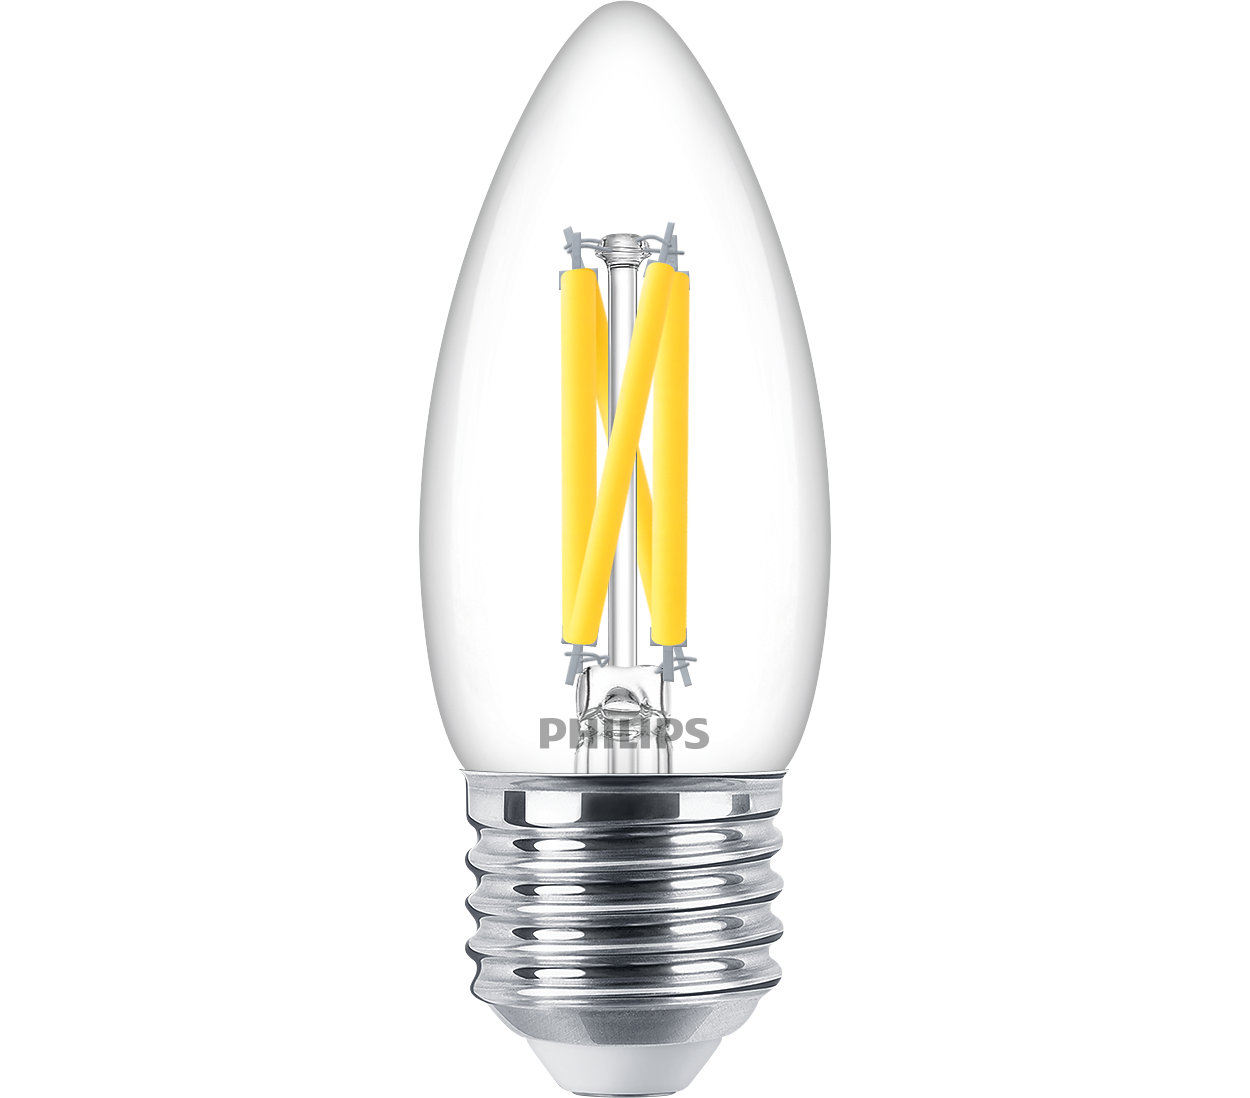 pierce Ambassador Foundation LED Candle & Lustre (Dimmable) 8719514384620 | Philips